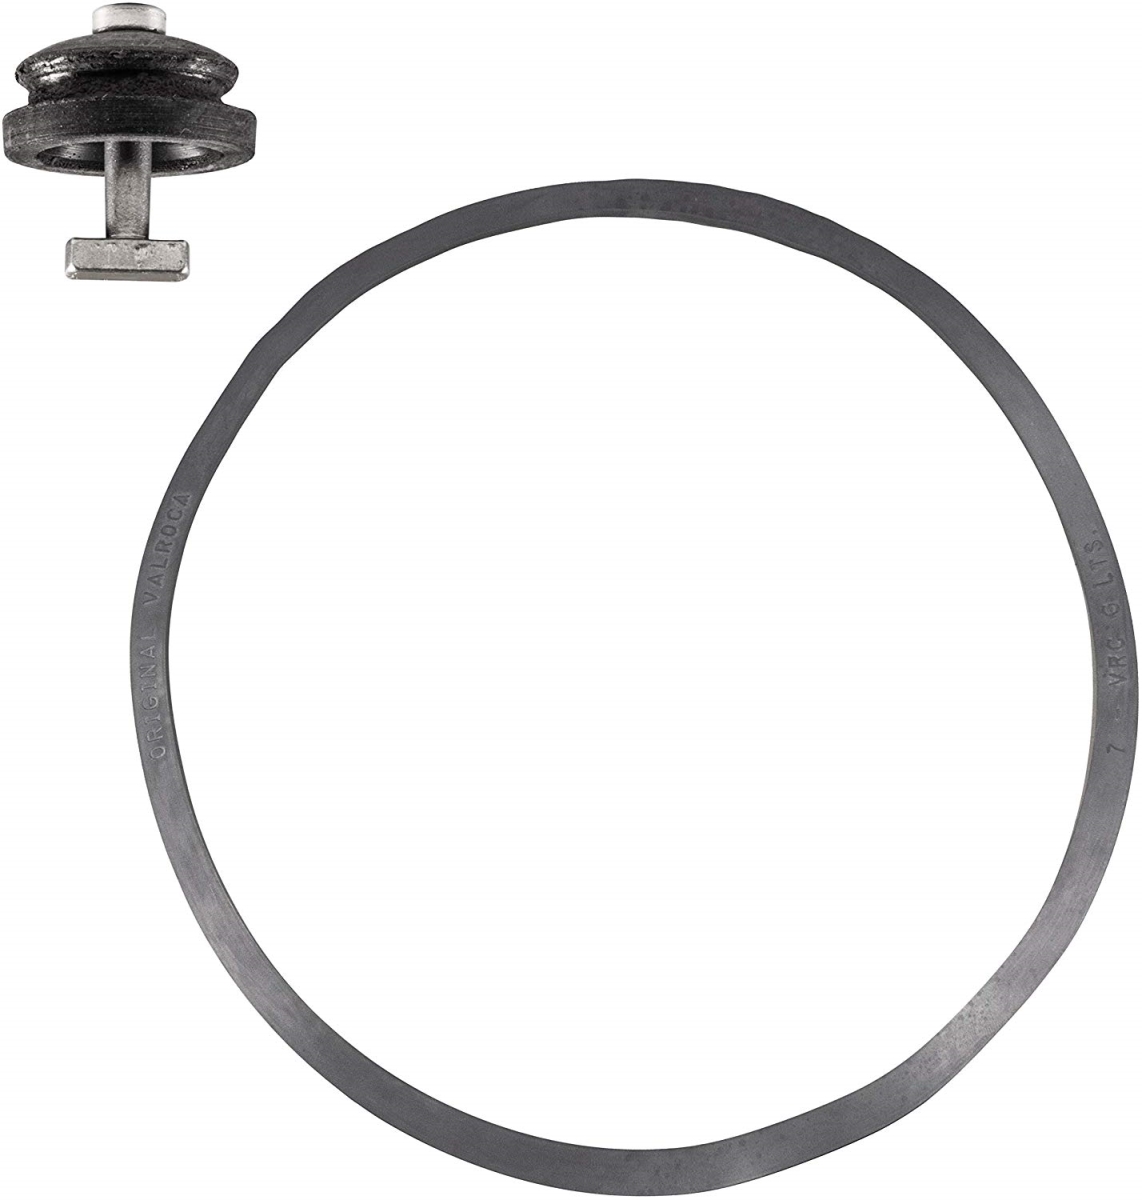 Picture of National Presto Industries 9901 2295 Sealing Ring